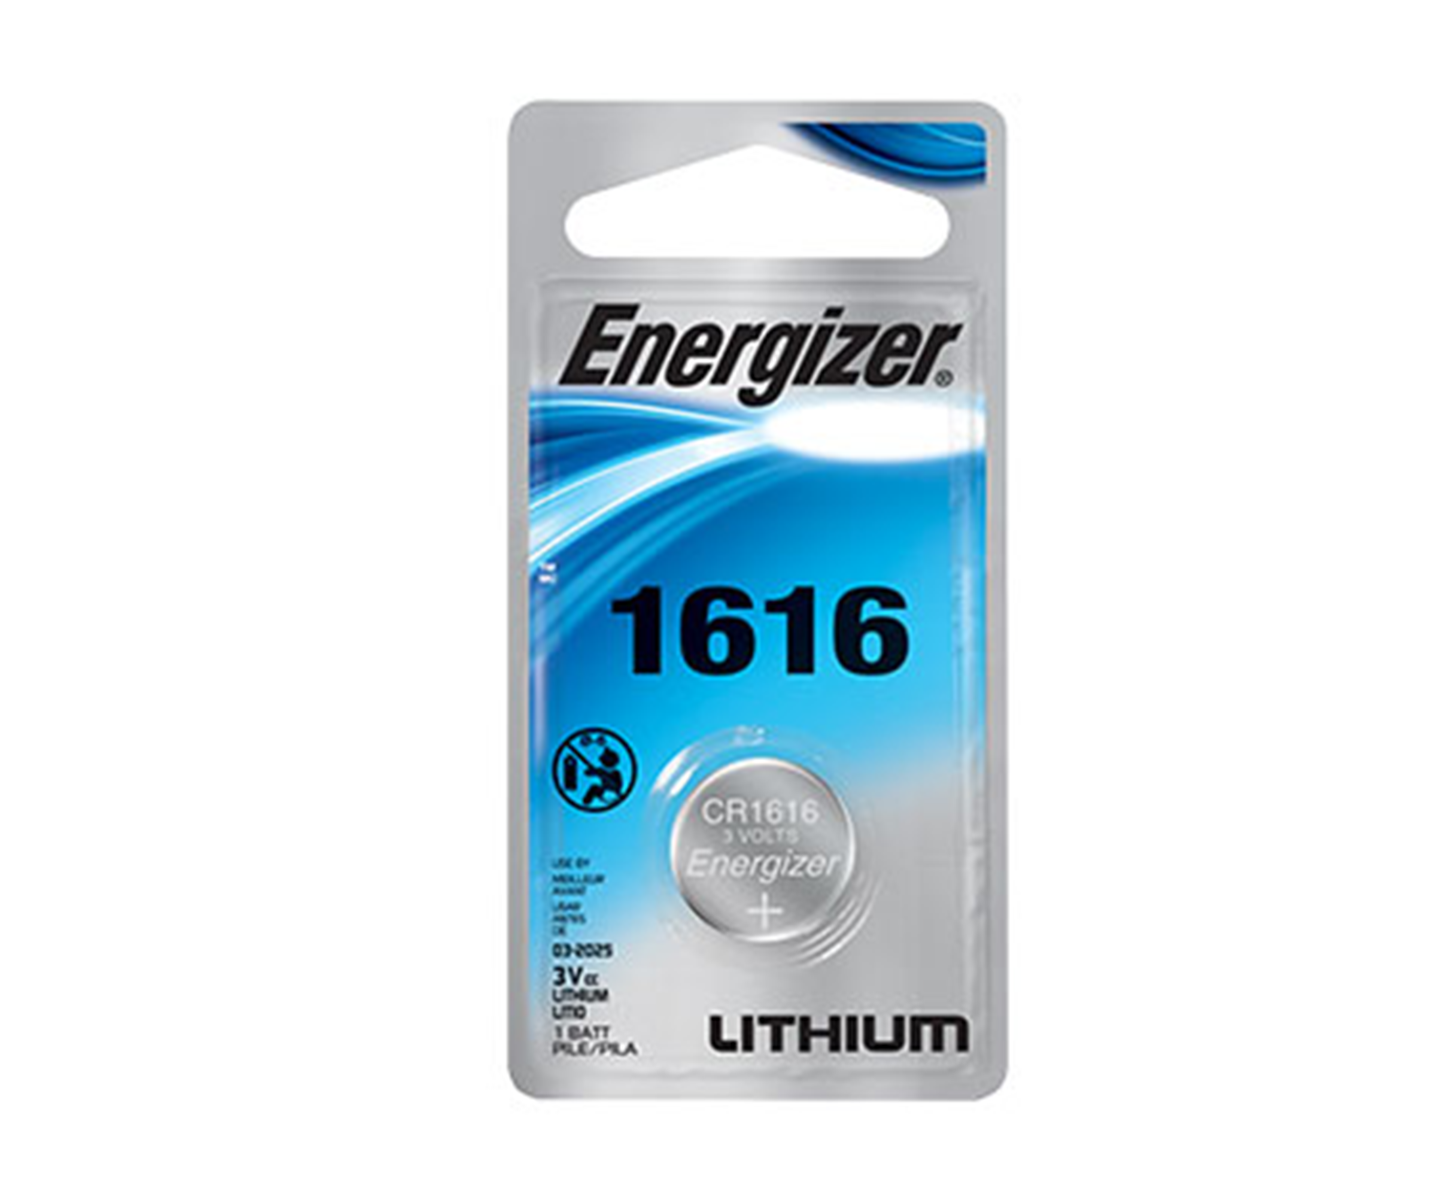 Energizer CR1616 Battery Lithium Coin Cell (1PC Blister Pack)